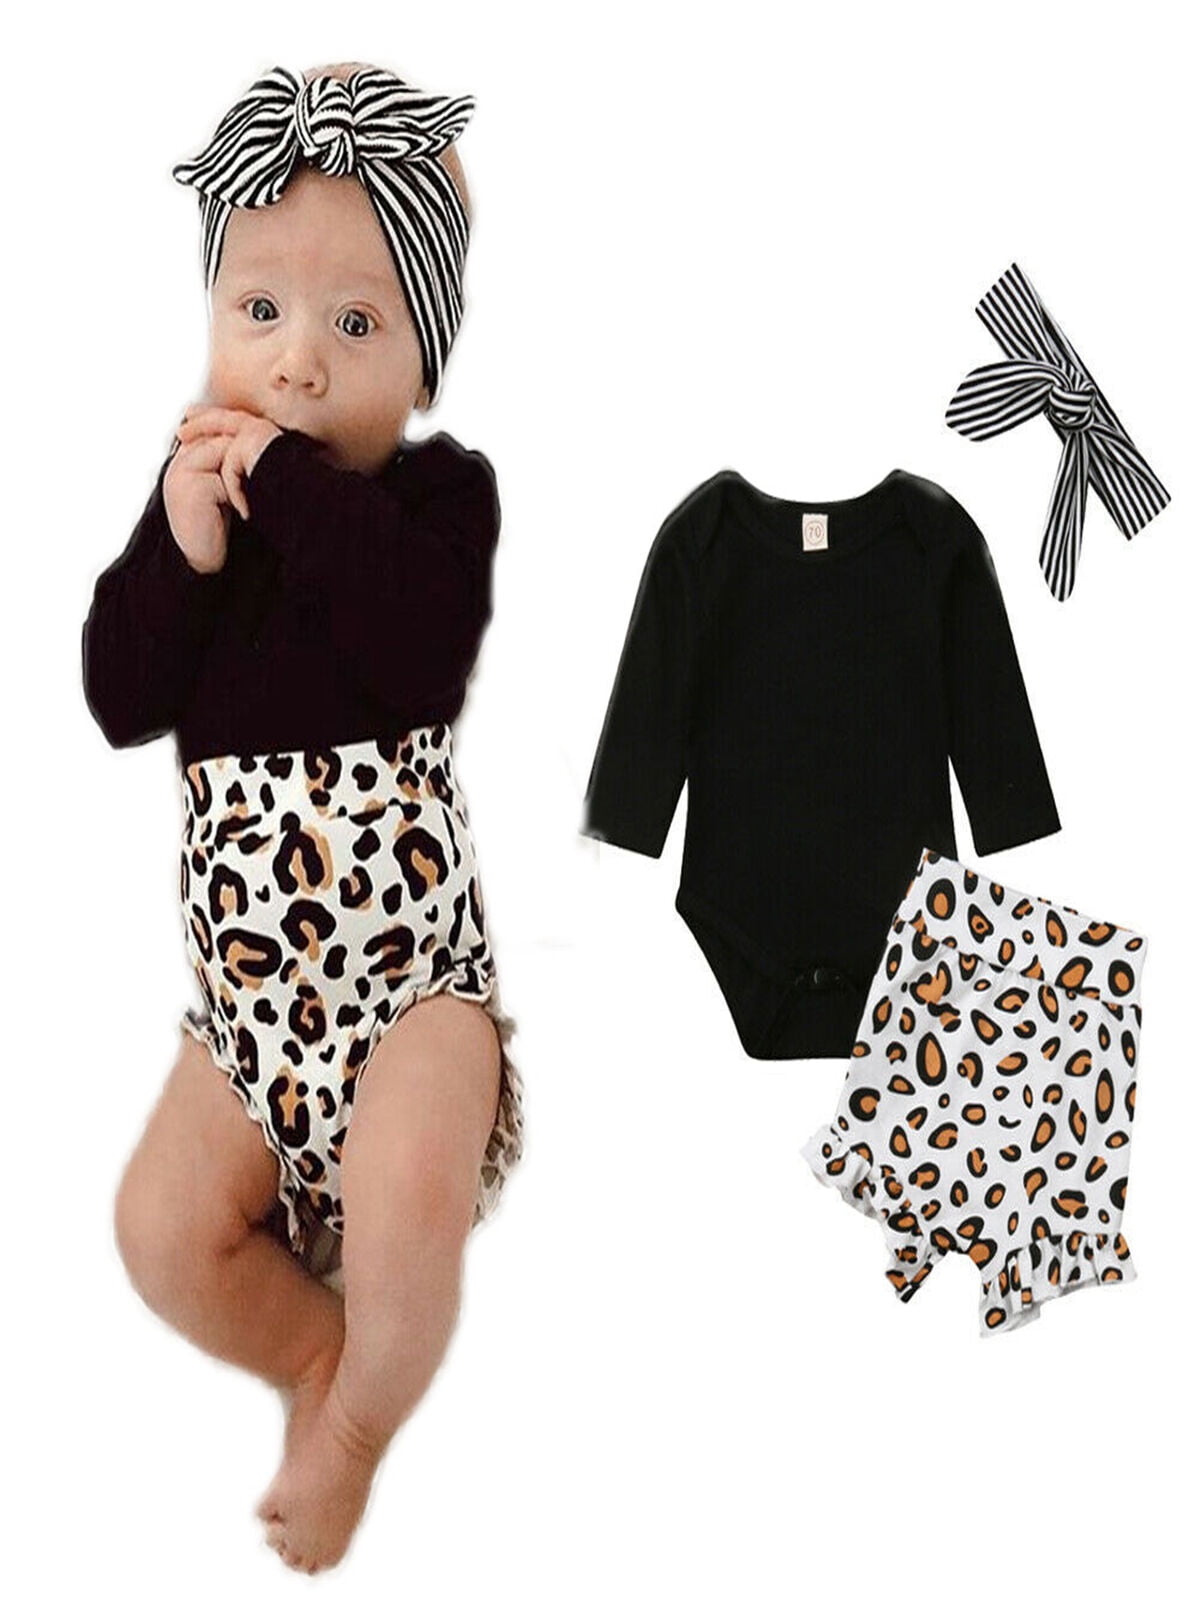 US Stock Newborn Infant Baby Girl Leopard Clothes Tops Romper+Short Pants Outfit 